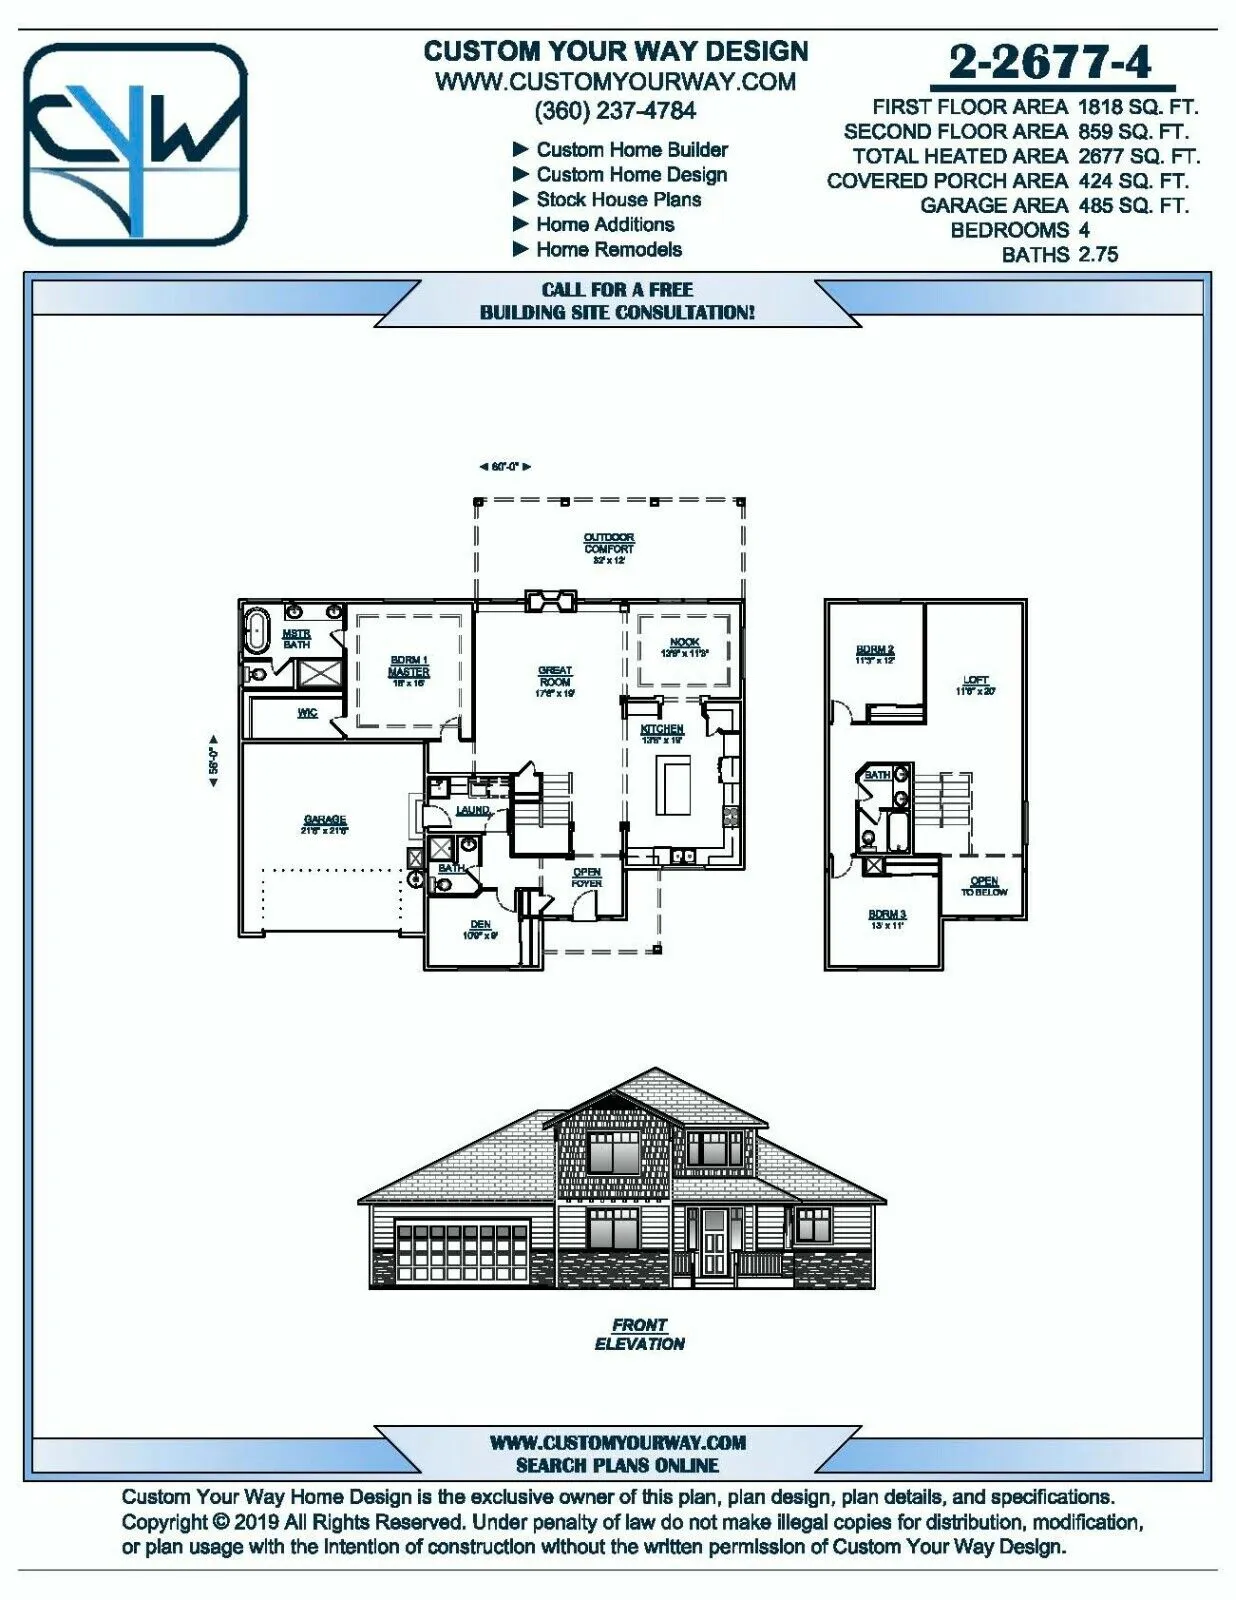 Two-Story Northwest House Plan, 2,677 sq. ft